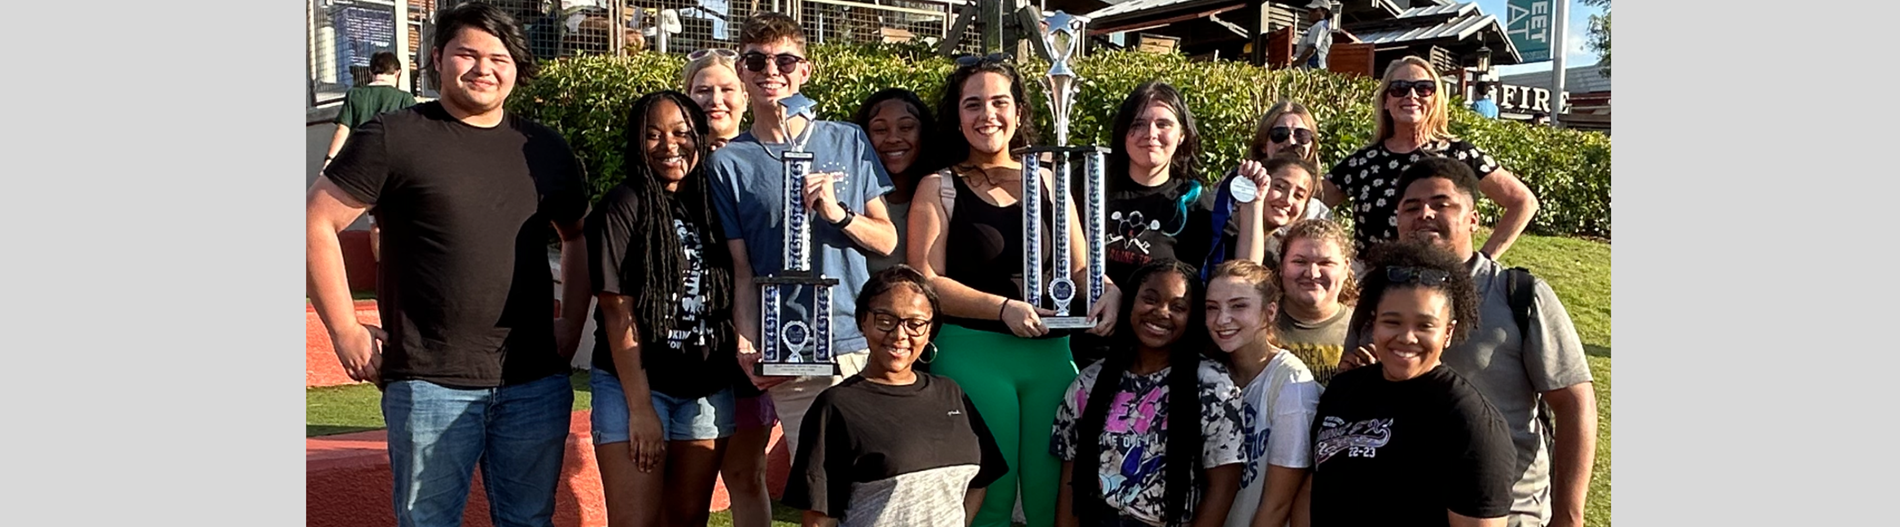 Show Choir Wins at "Music in the Parks"